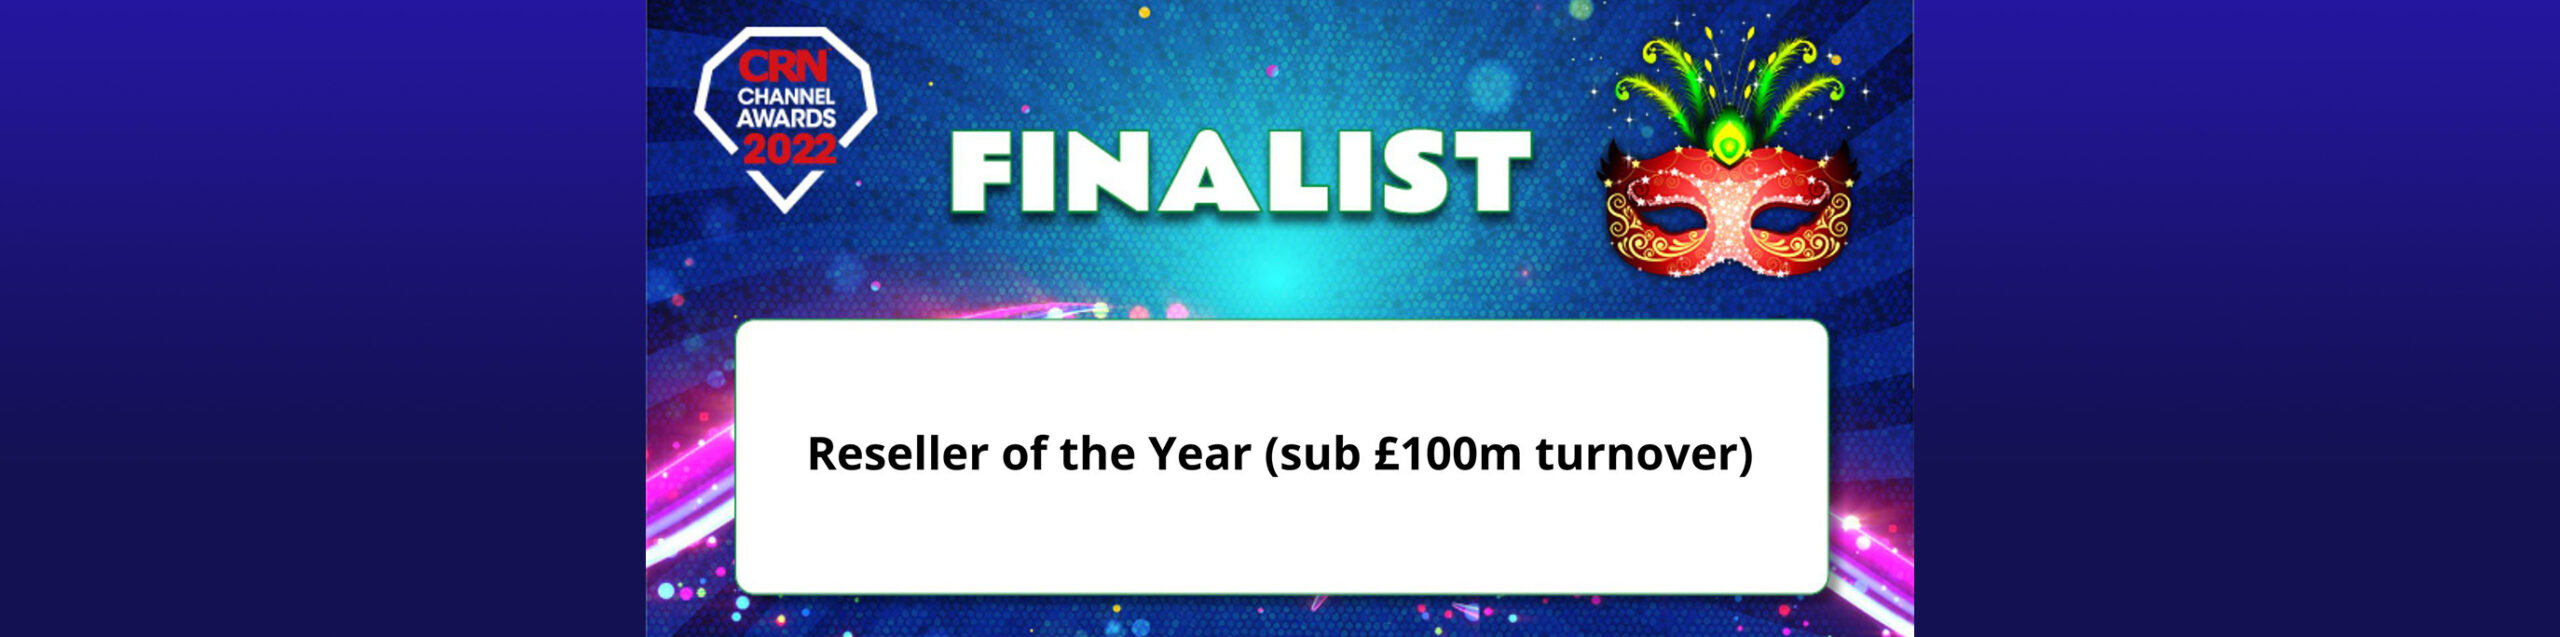 finalists - reseller of the year